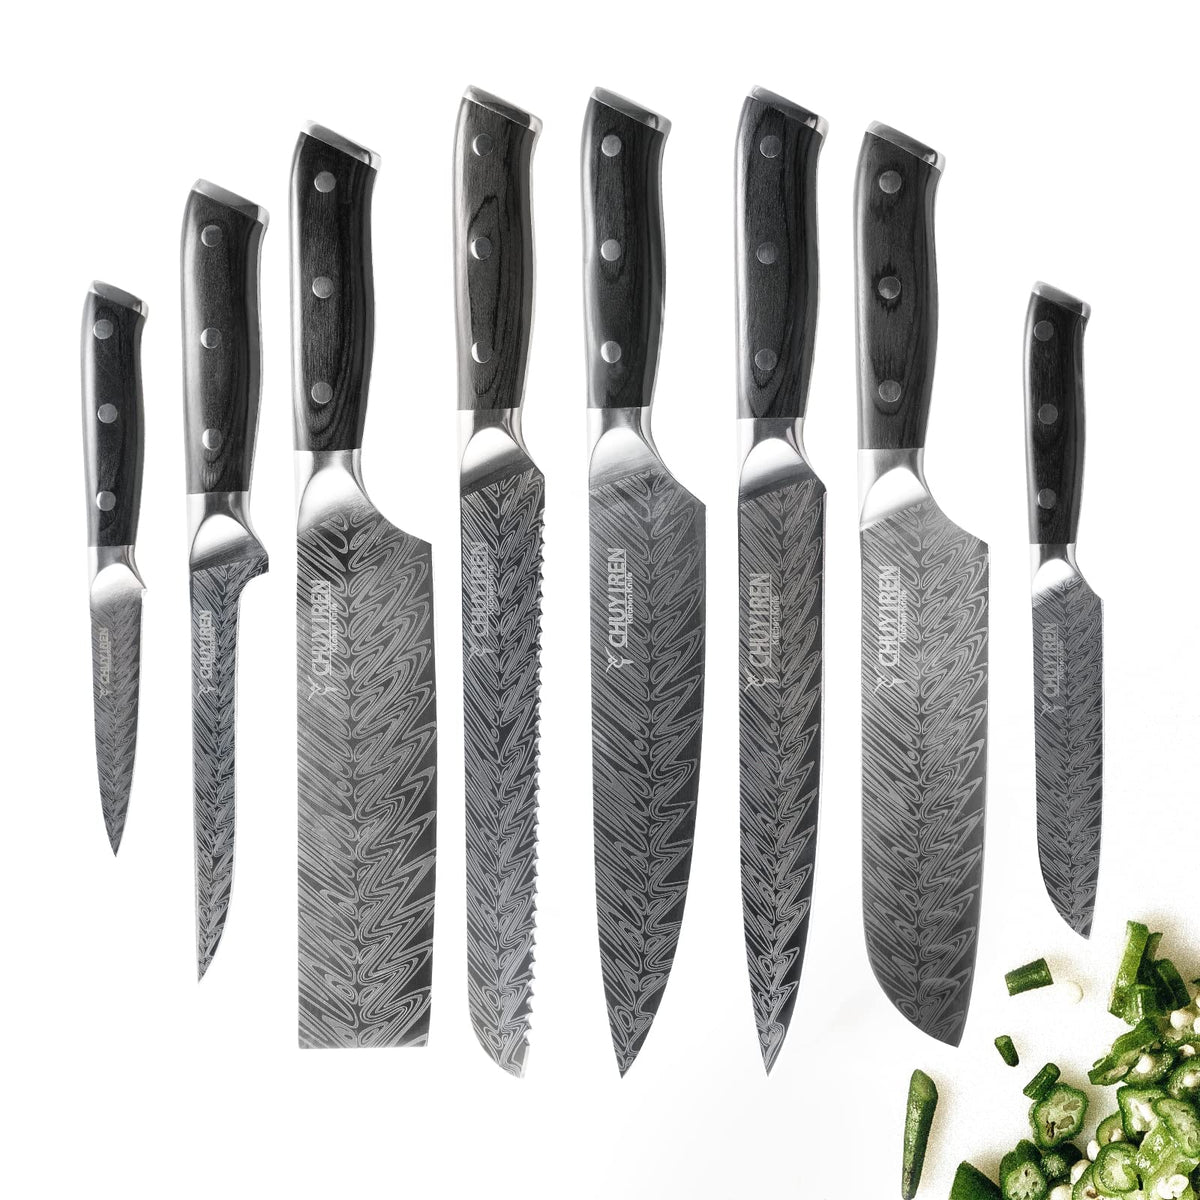 CHUYIREN Pink Knife Set of 6 Stainless Steel Kitchen Knives Sets